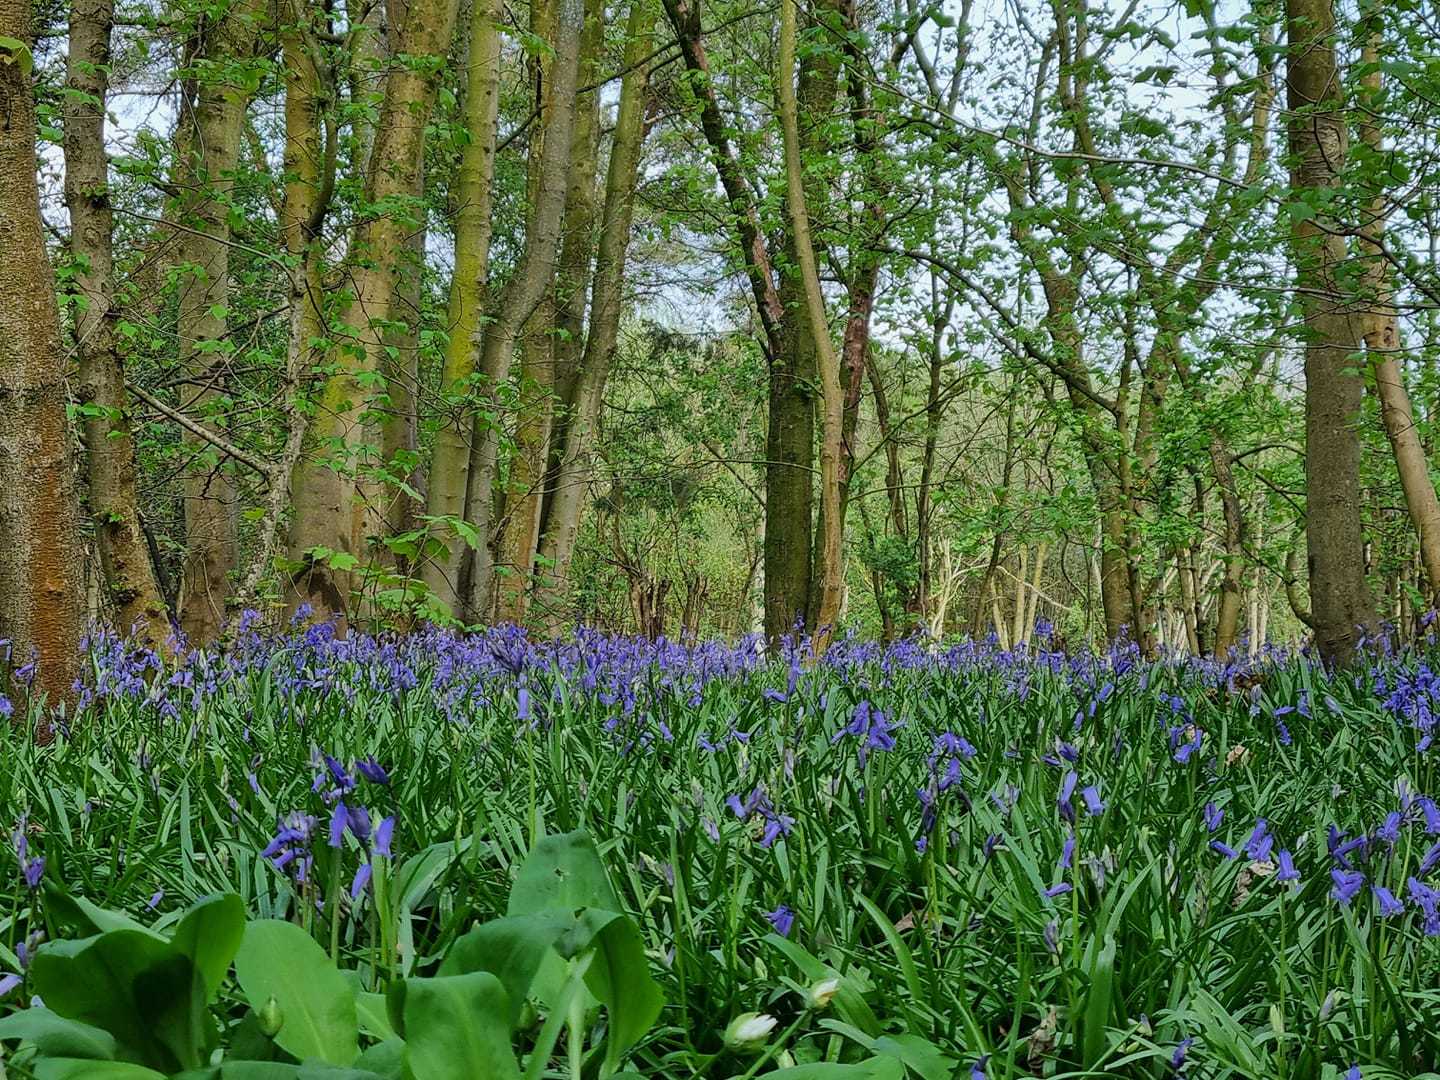 A sea of bluebells by Ann Brownbill